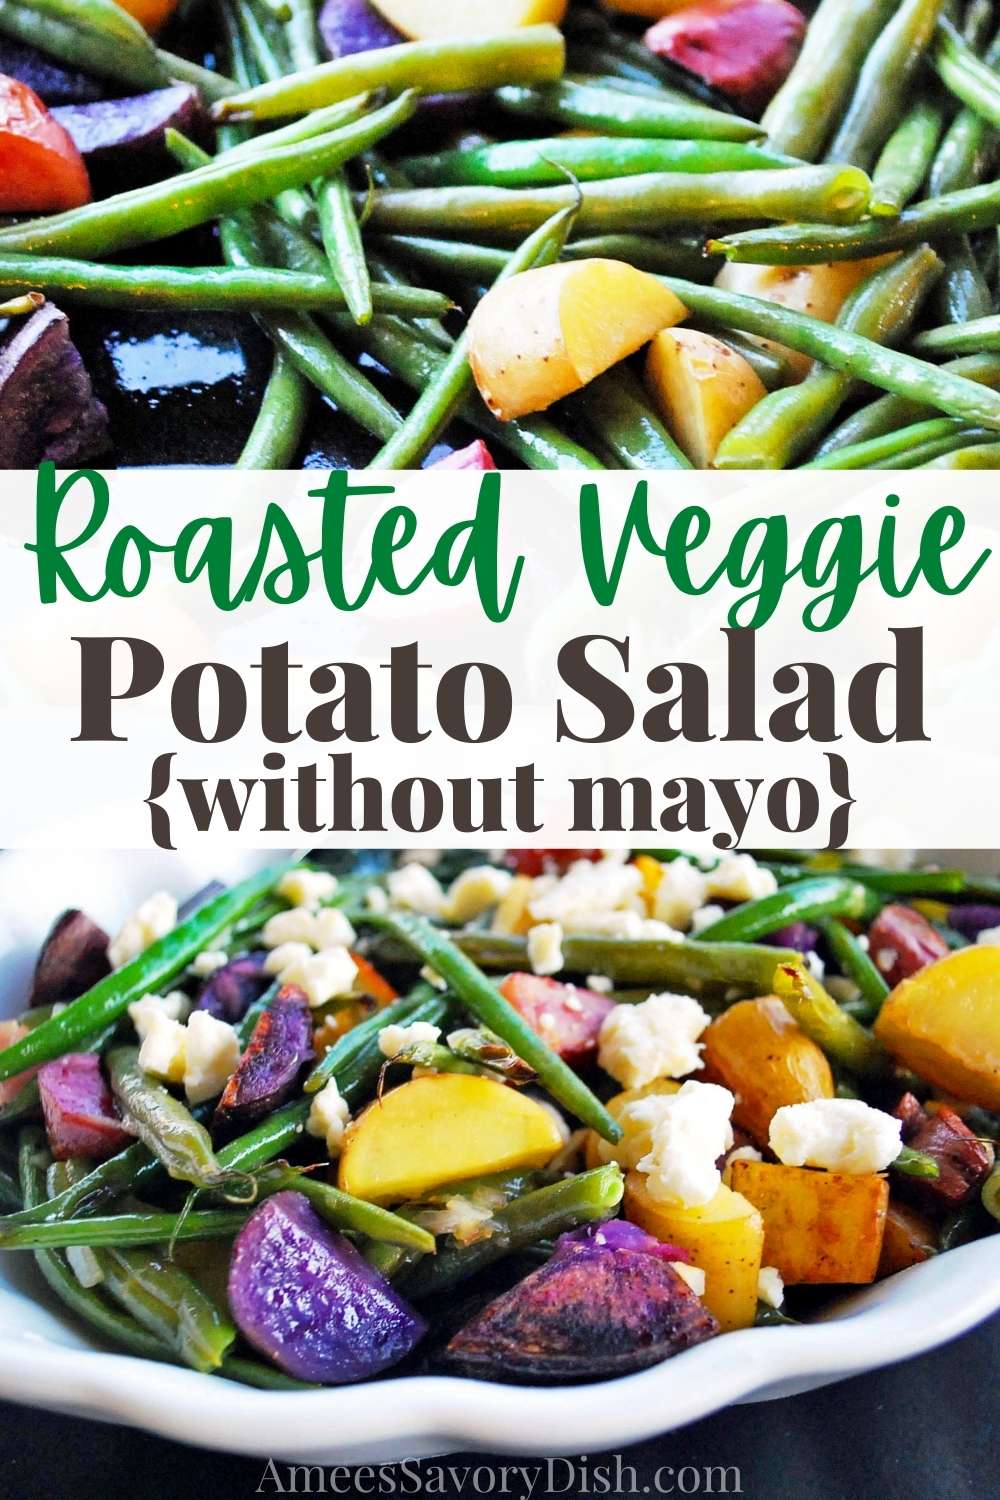 With fresh beans and cool feta cheese, this Roasted Potato Salad with Lemon Vinaigrette is the best mayo-free summer side dish. Prepare this delicious recipe for your next picnic or potluck in 40 minutes or less! via @Ameessavorydish